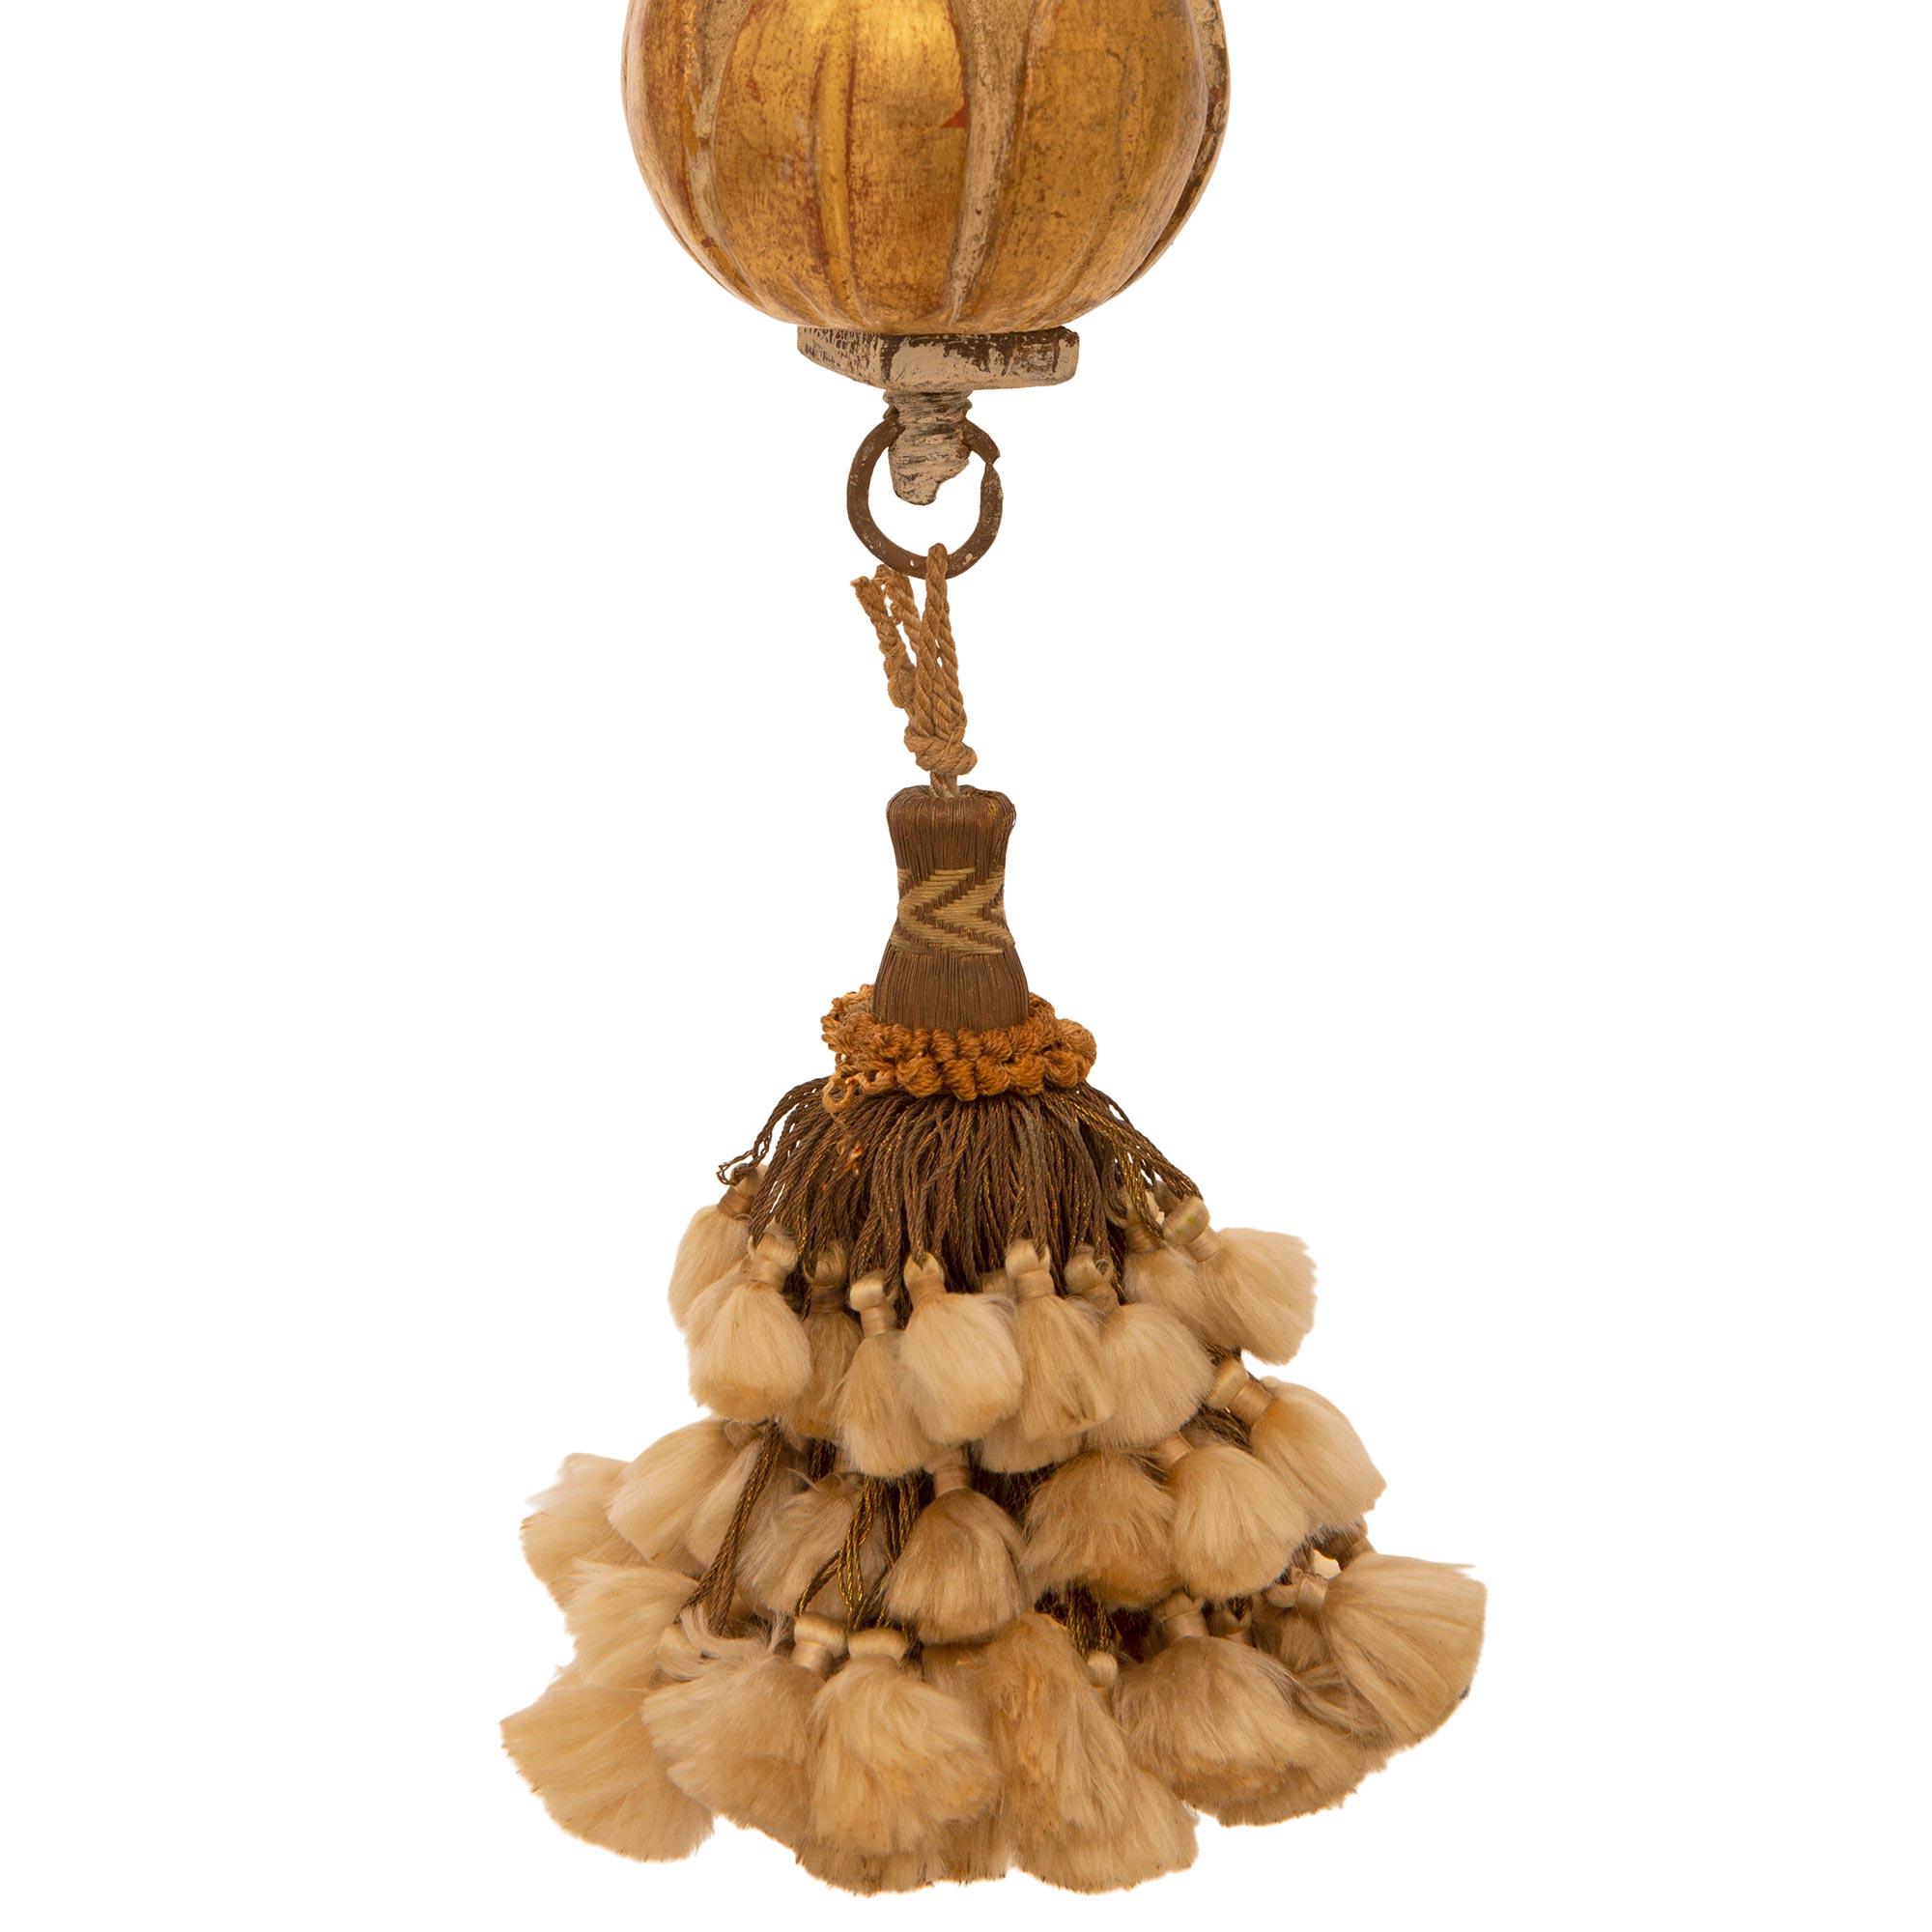 An extremely decorative and unique pair of Italian late 17th century Louis XIV Period patinated wood and Giltwood chandeliers. Each beautiful six arm six light chandelier is centered by a bouquet of silk tassels hanging below a foliate decorated